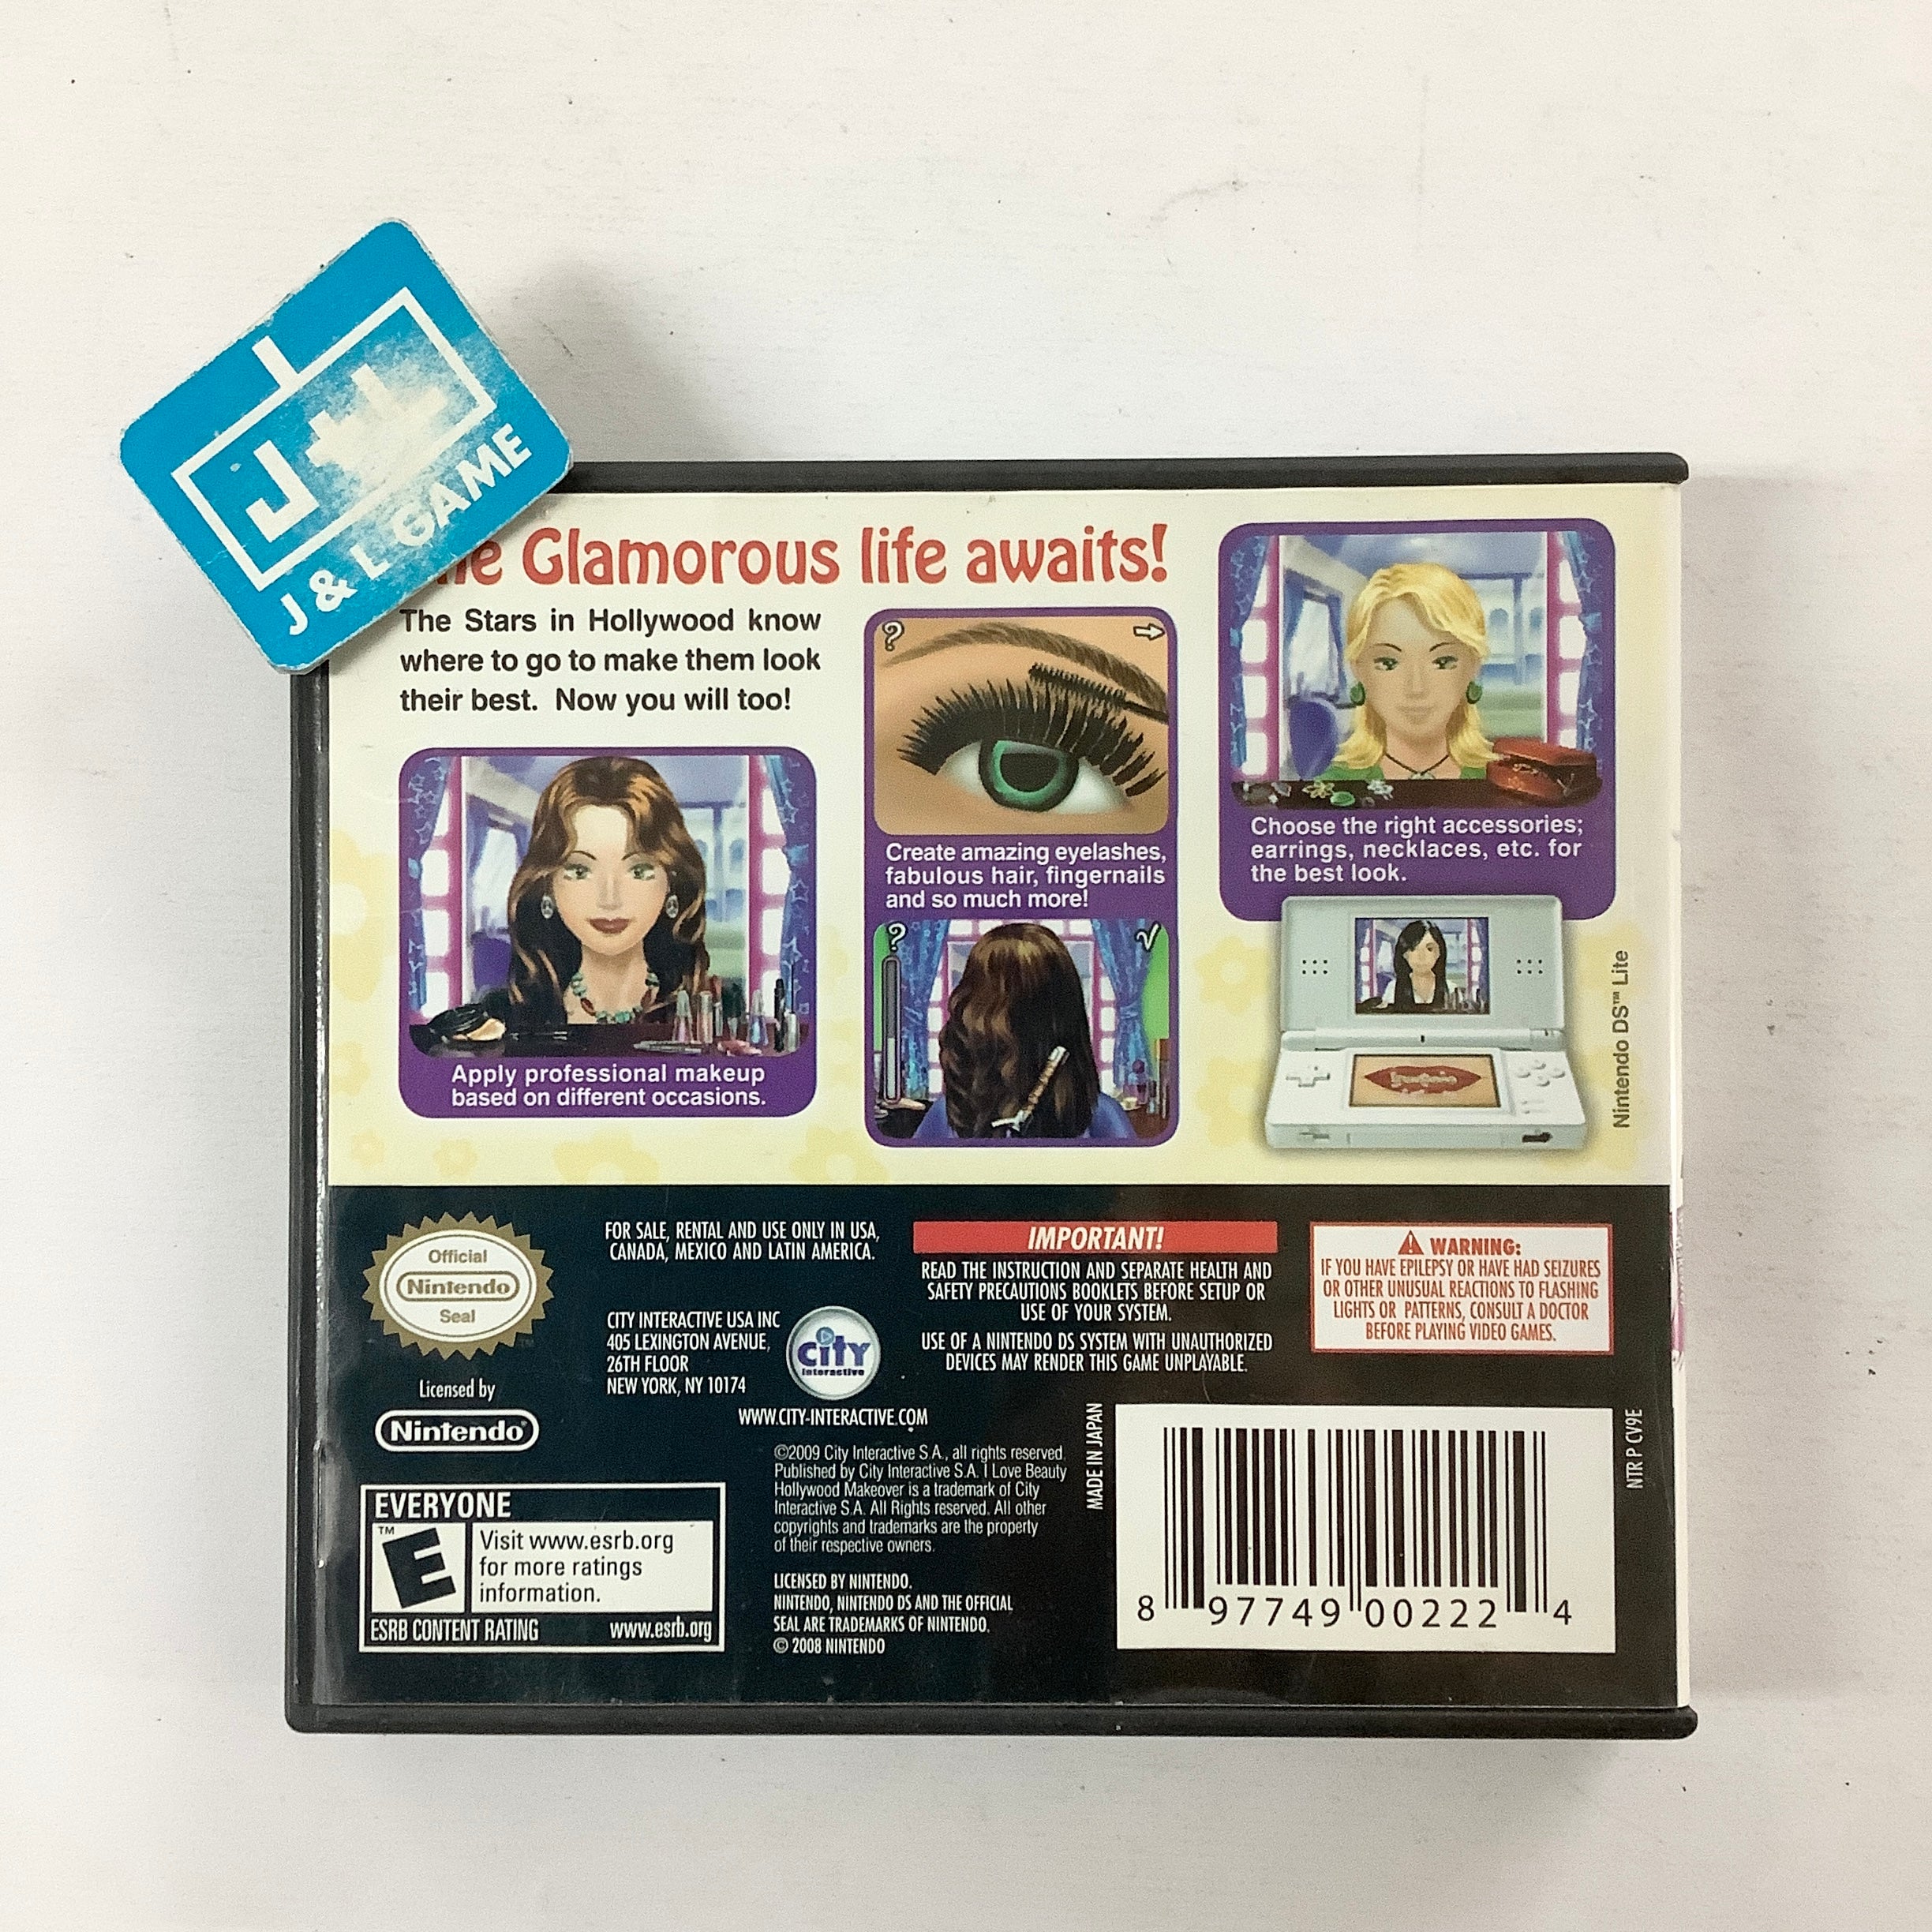 I Love Beauty: Hollywood Makeover - (NDS) Nintendo DS [Pre-Owned]